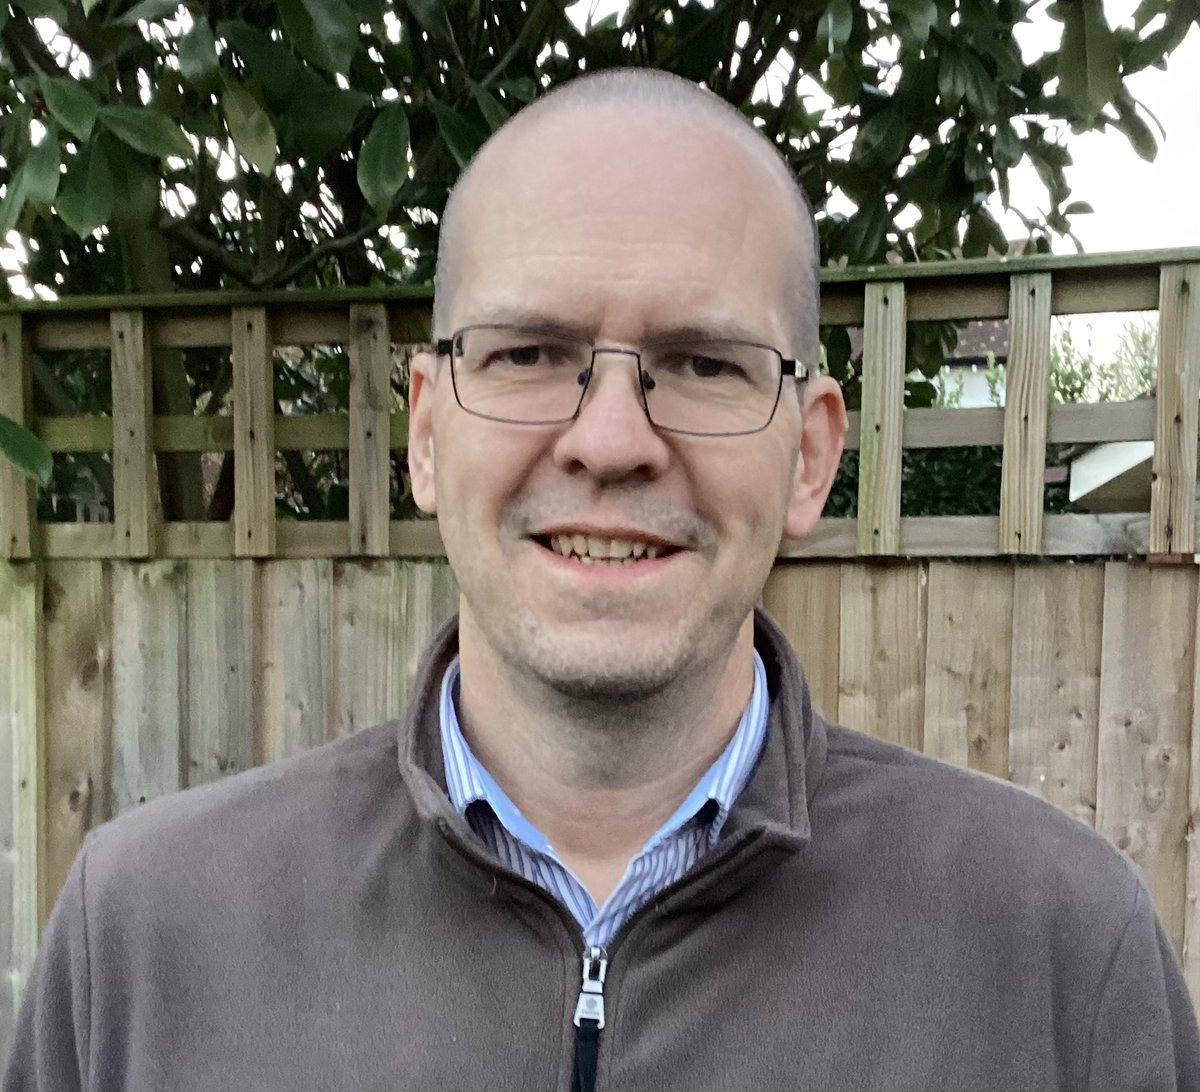 Praying for The Revd David King as he is licensed by the Bishop as Team Vicar of South Crawley with particular responsibility for Christ the Lord, Broadfield, where the service takes place.